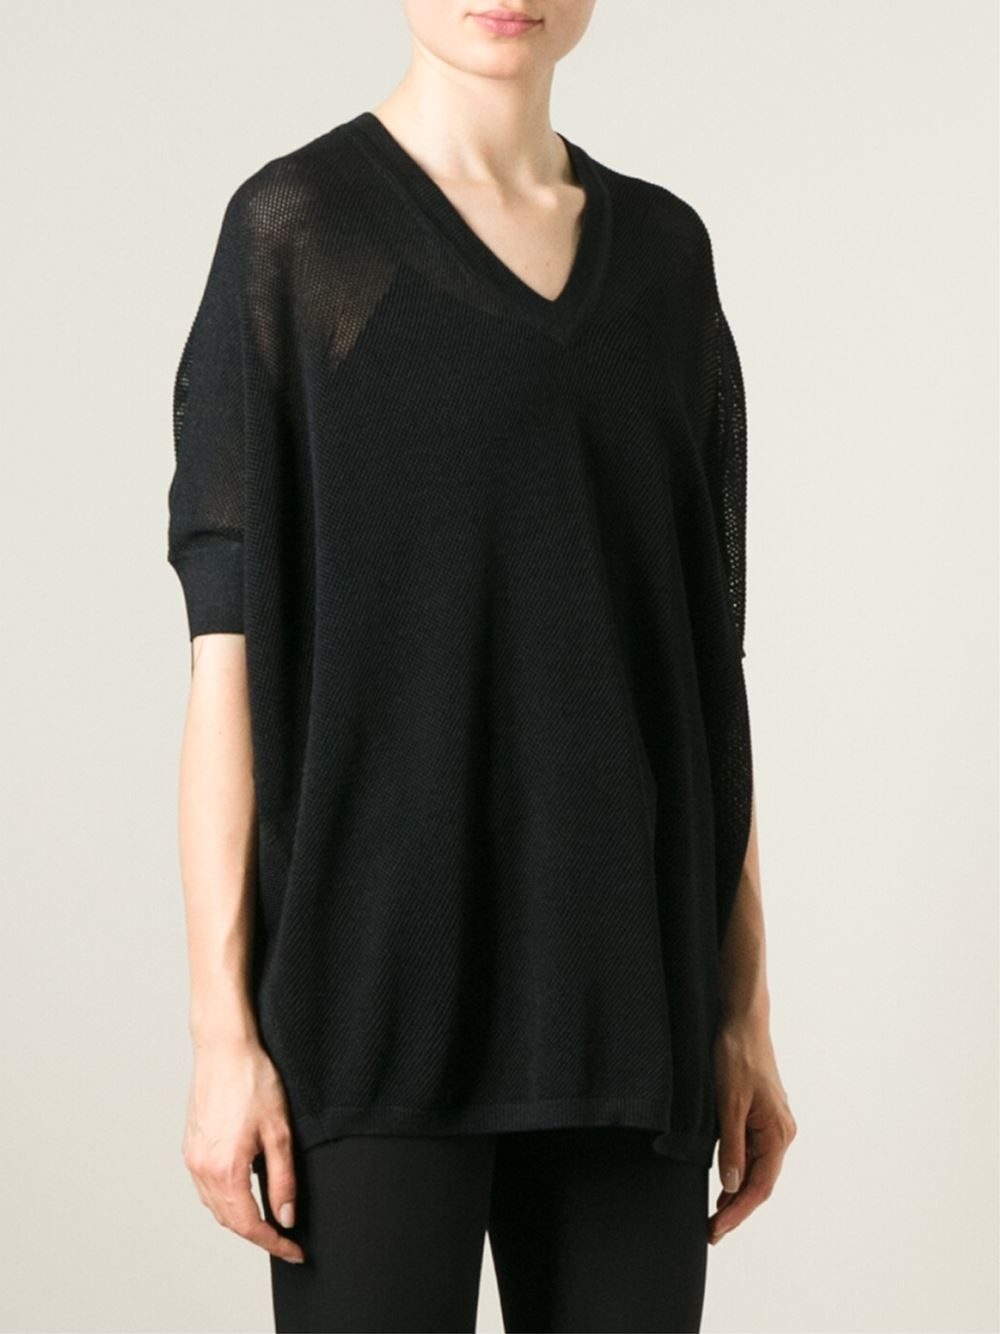 Lyst - Dkny See-Through Mesh Sweater in Black